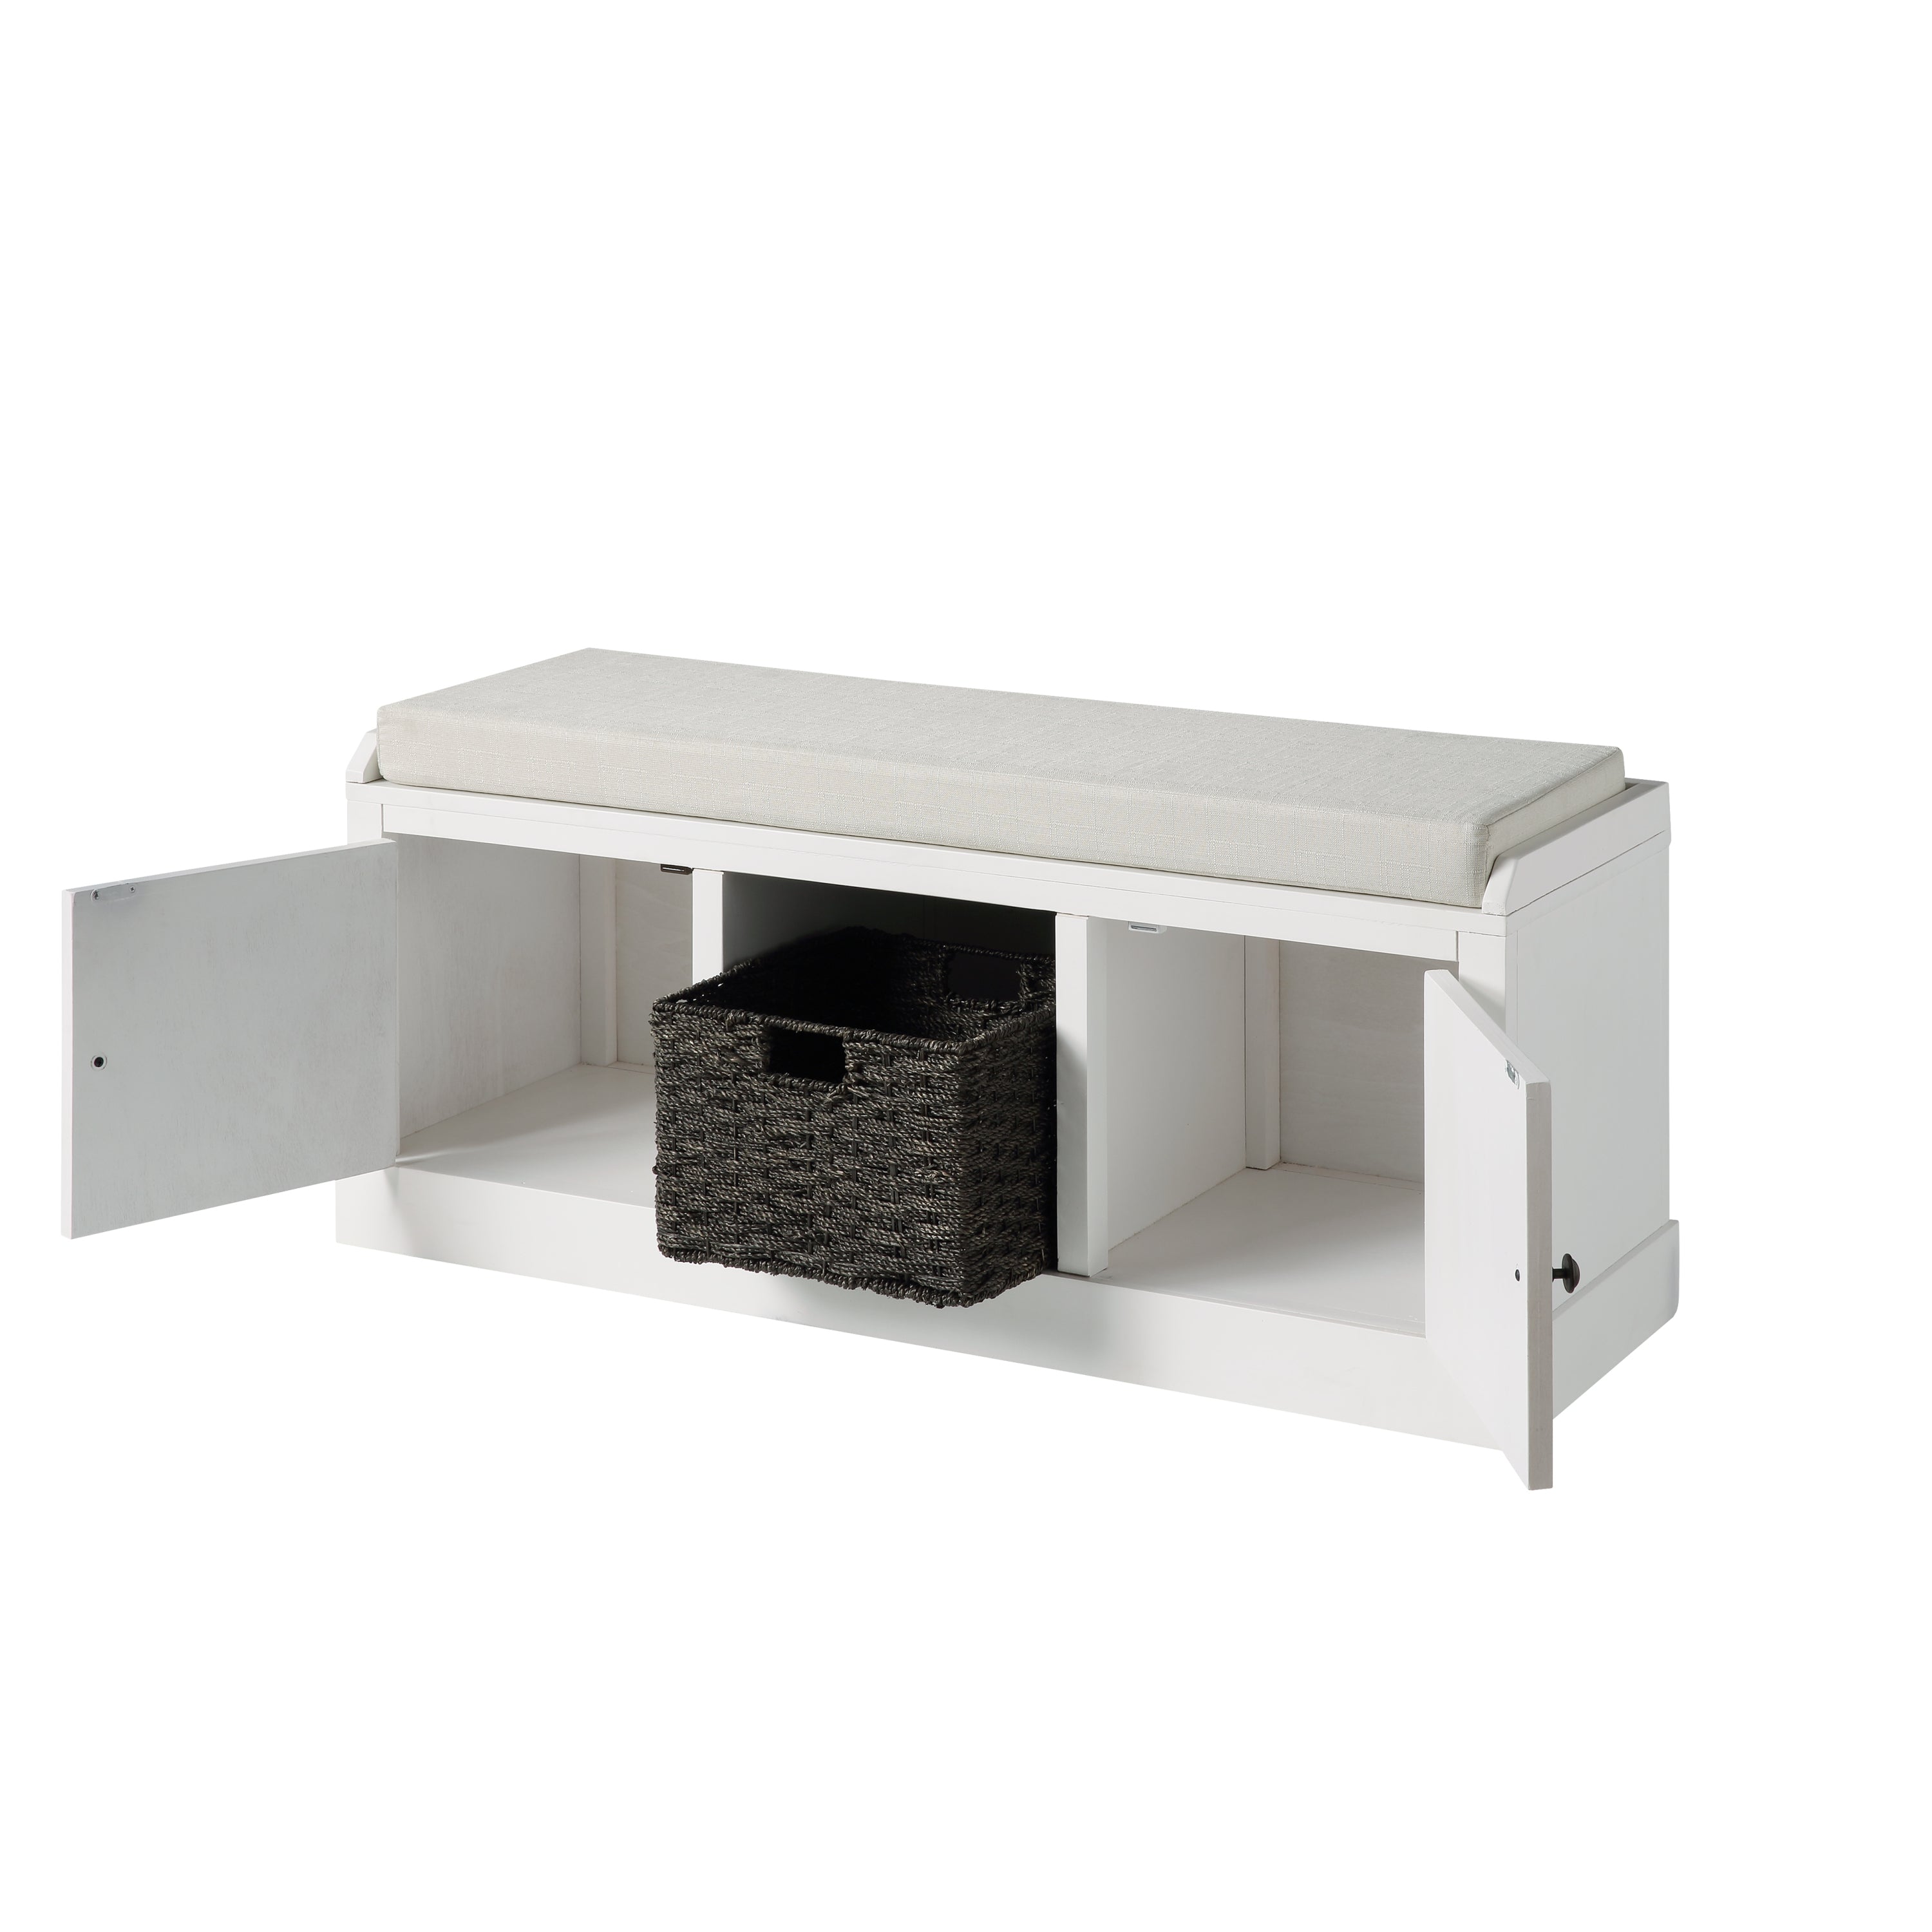 U_STYLE Homes Collection Wooden Storage Bench